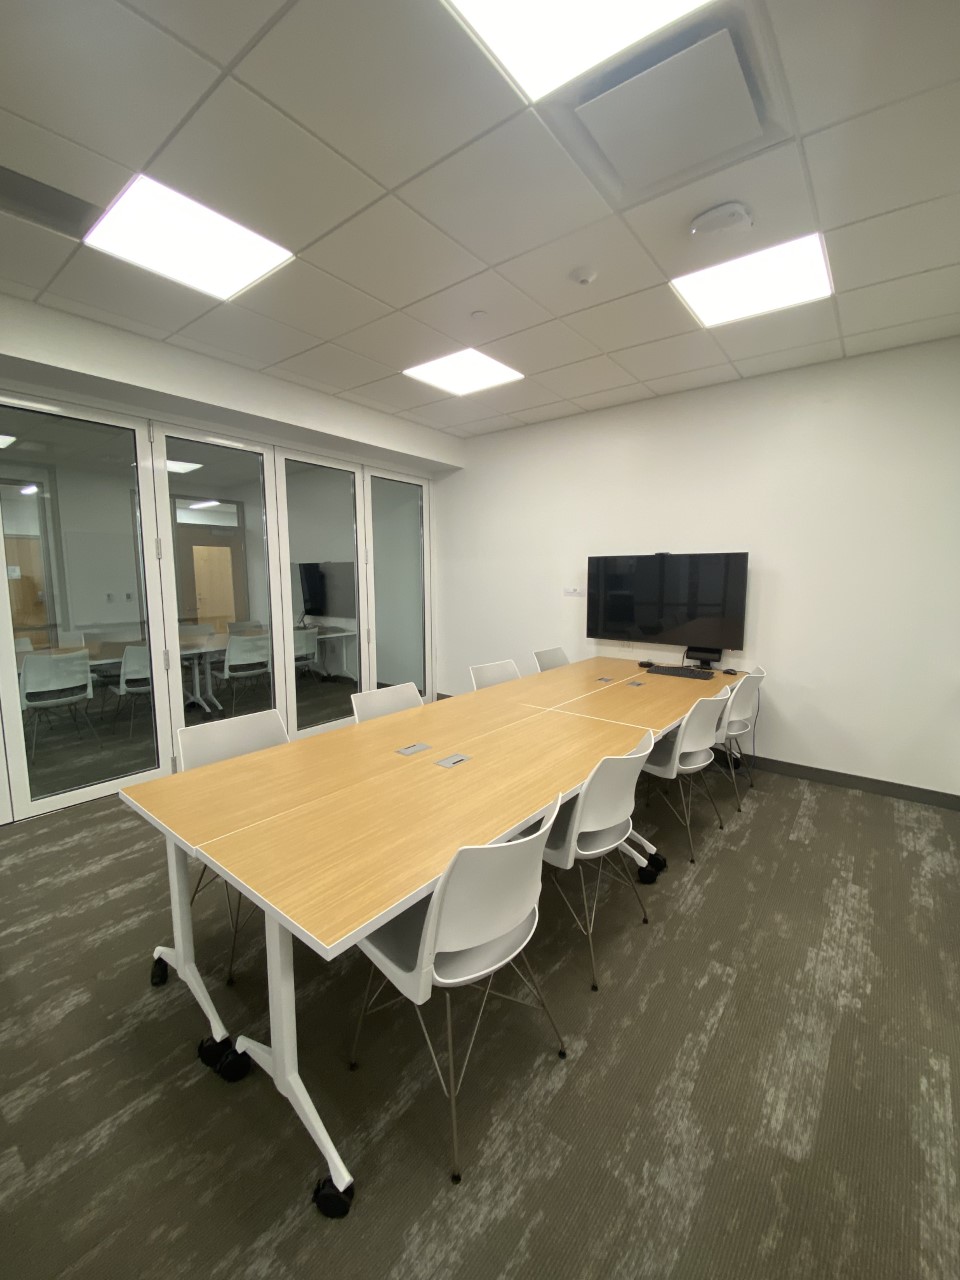 Picture of 309 Conference room, with table and chairs